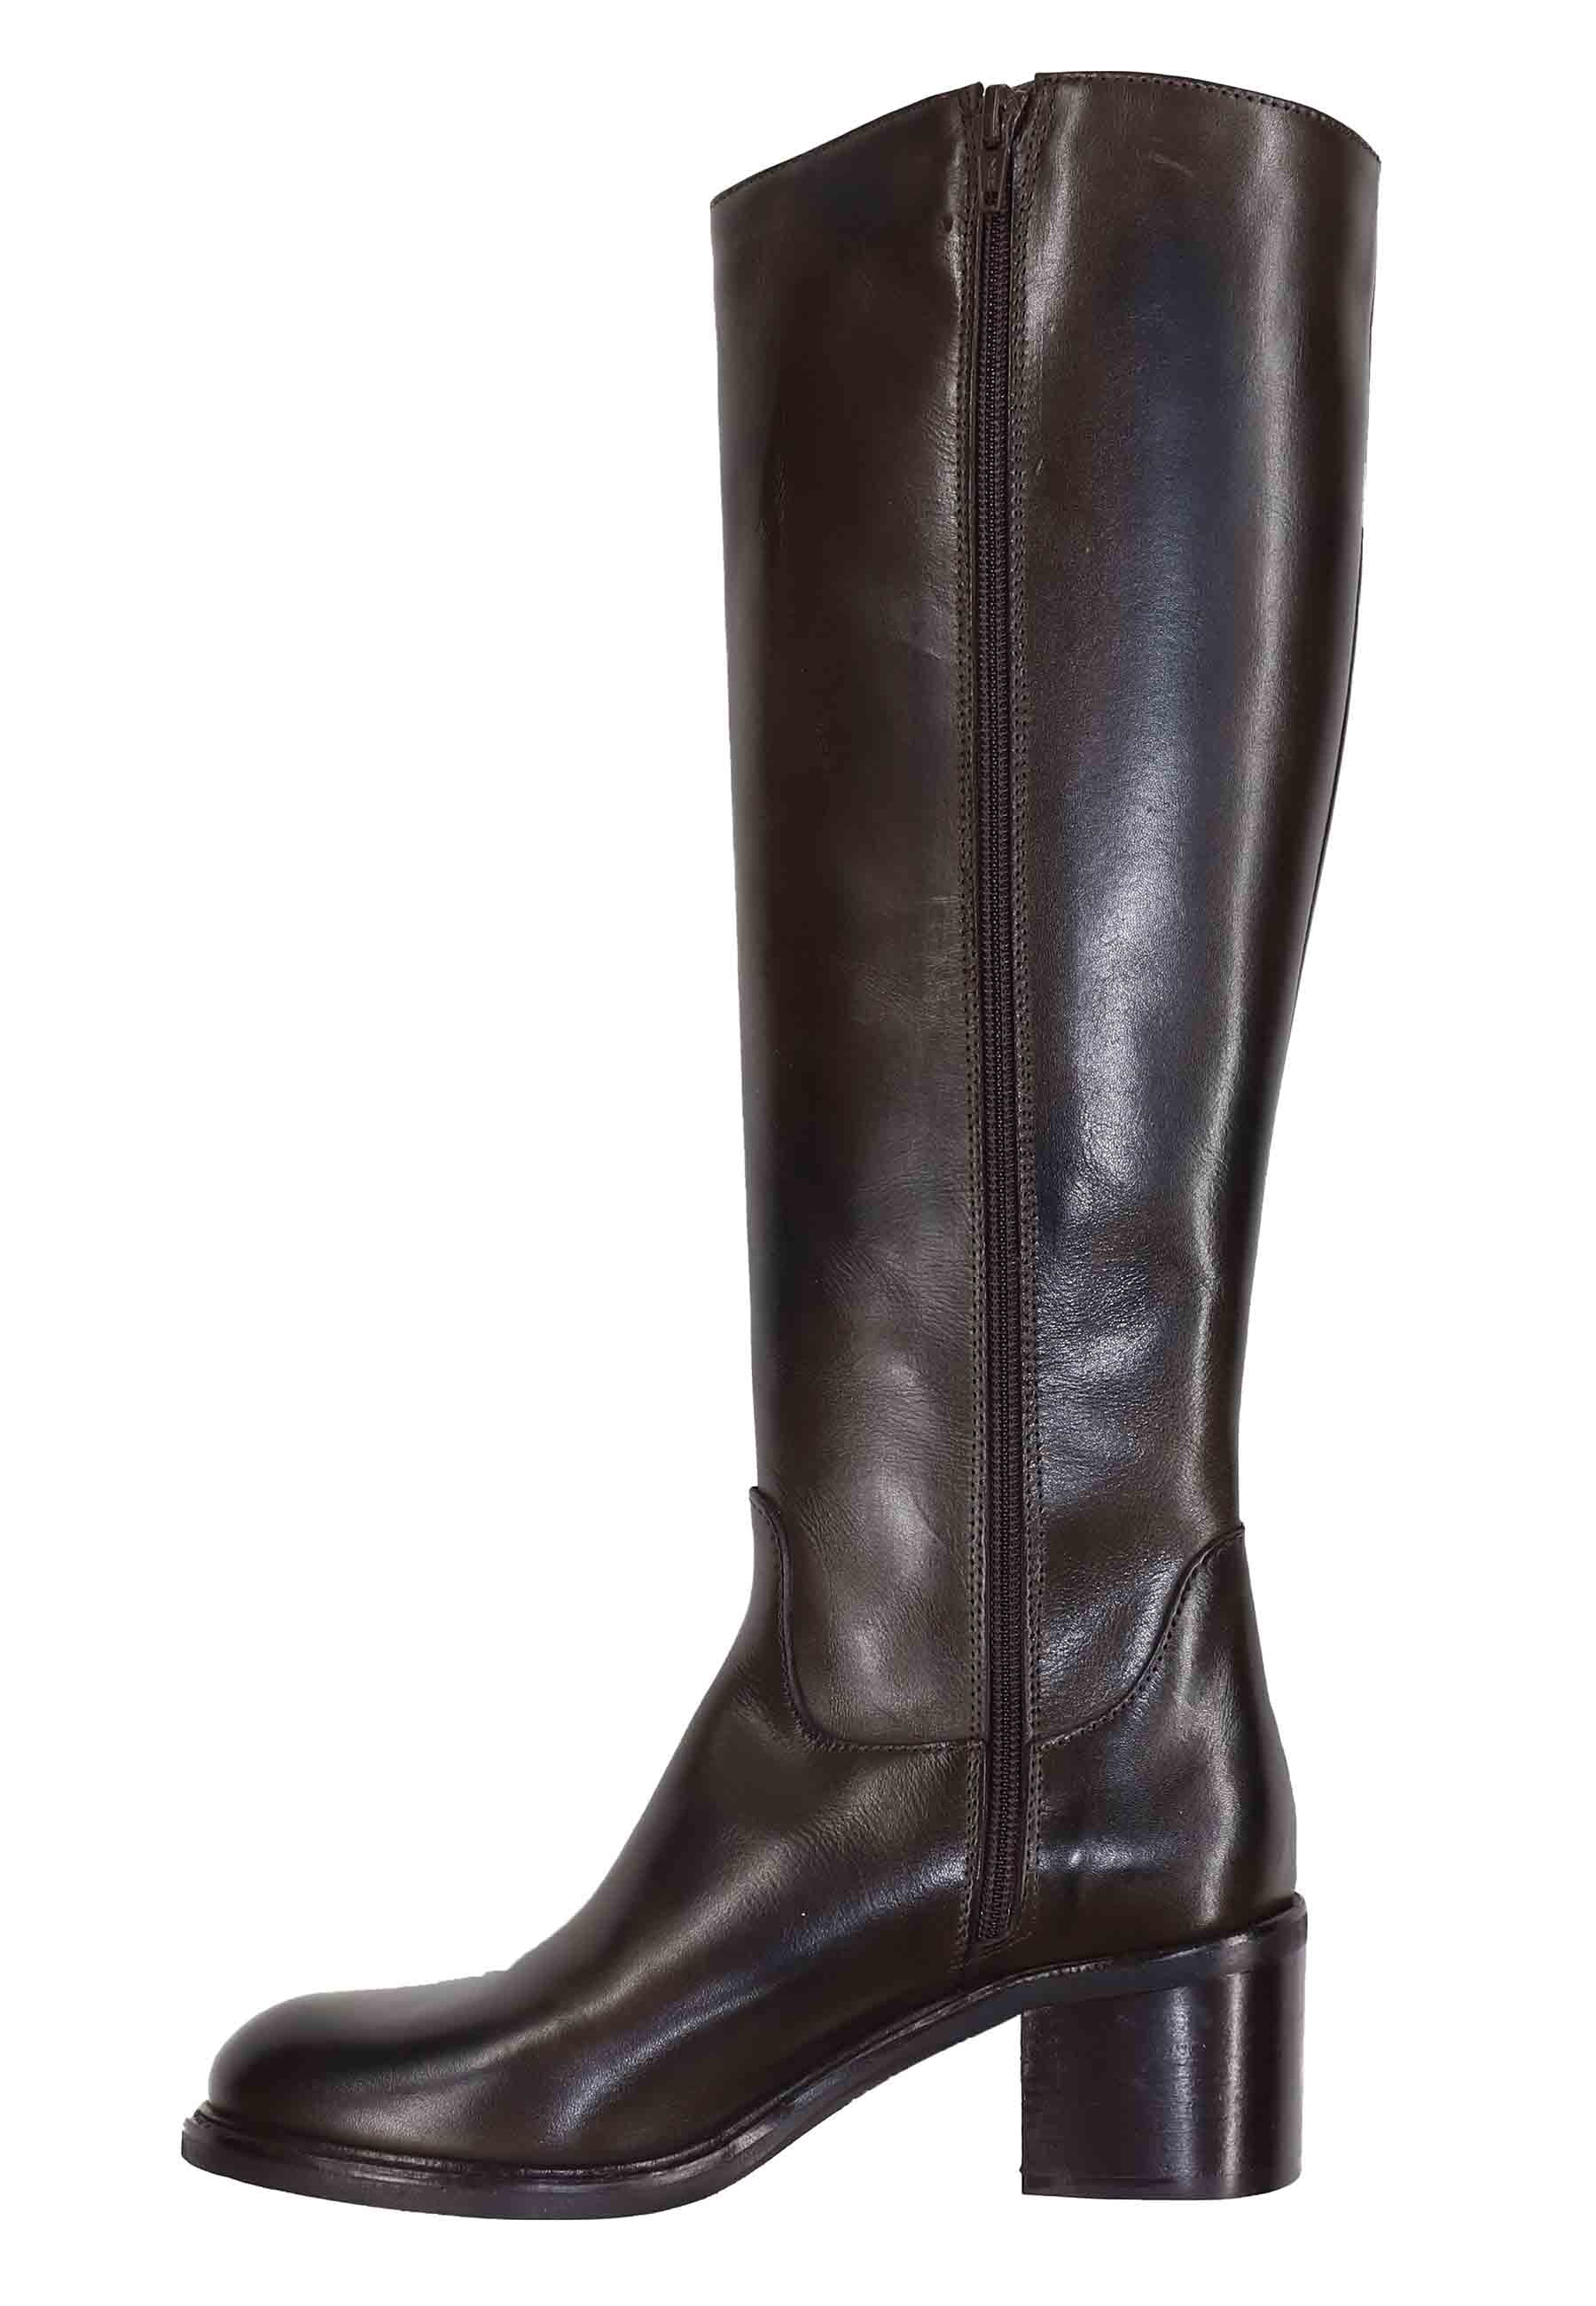 Women's boots in dark brown leather with leather heel and side strap